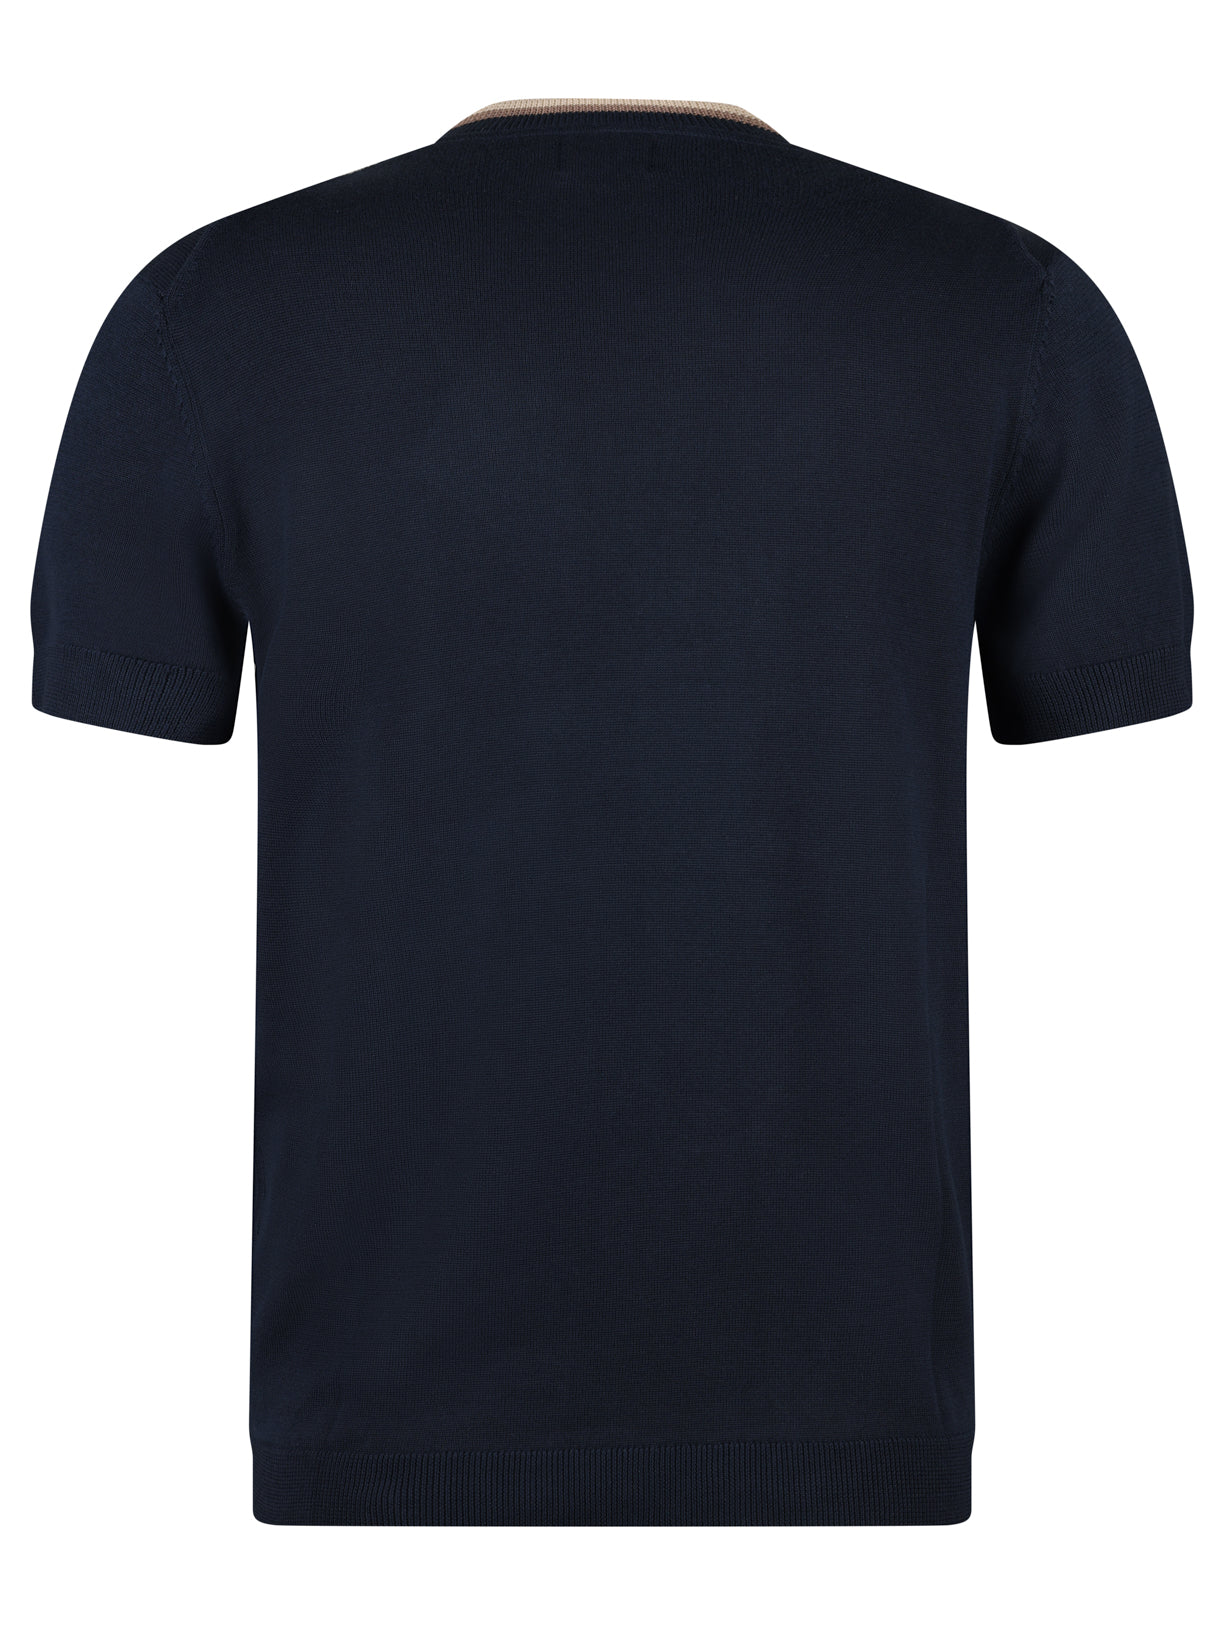 Load image into Gallery viewer, Sseinse Knitted Tee Navy
